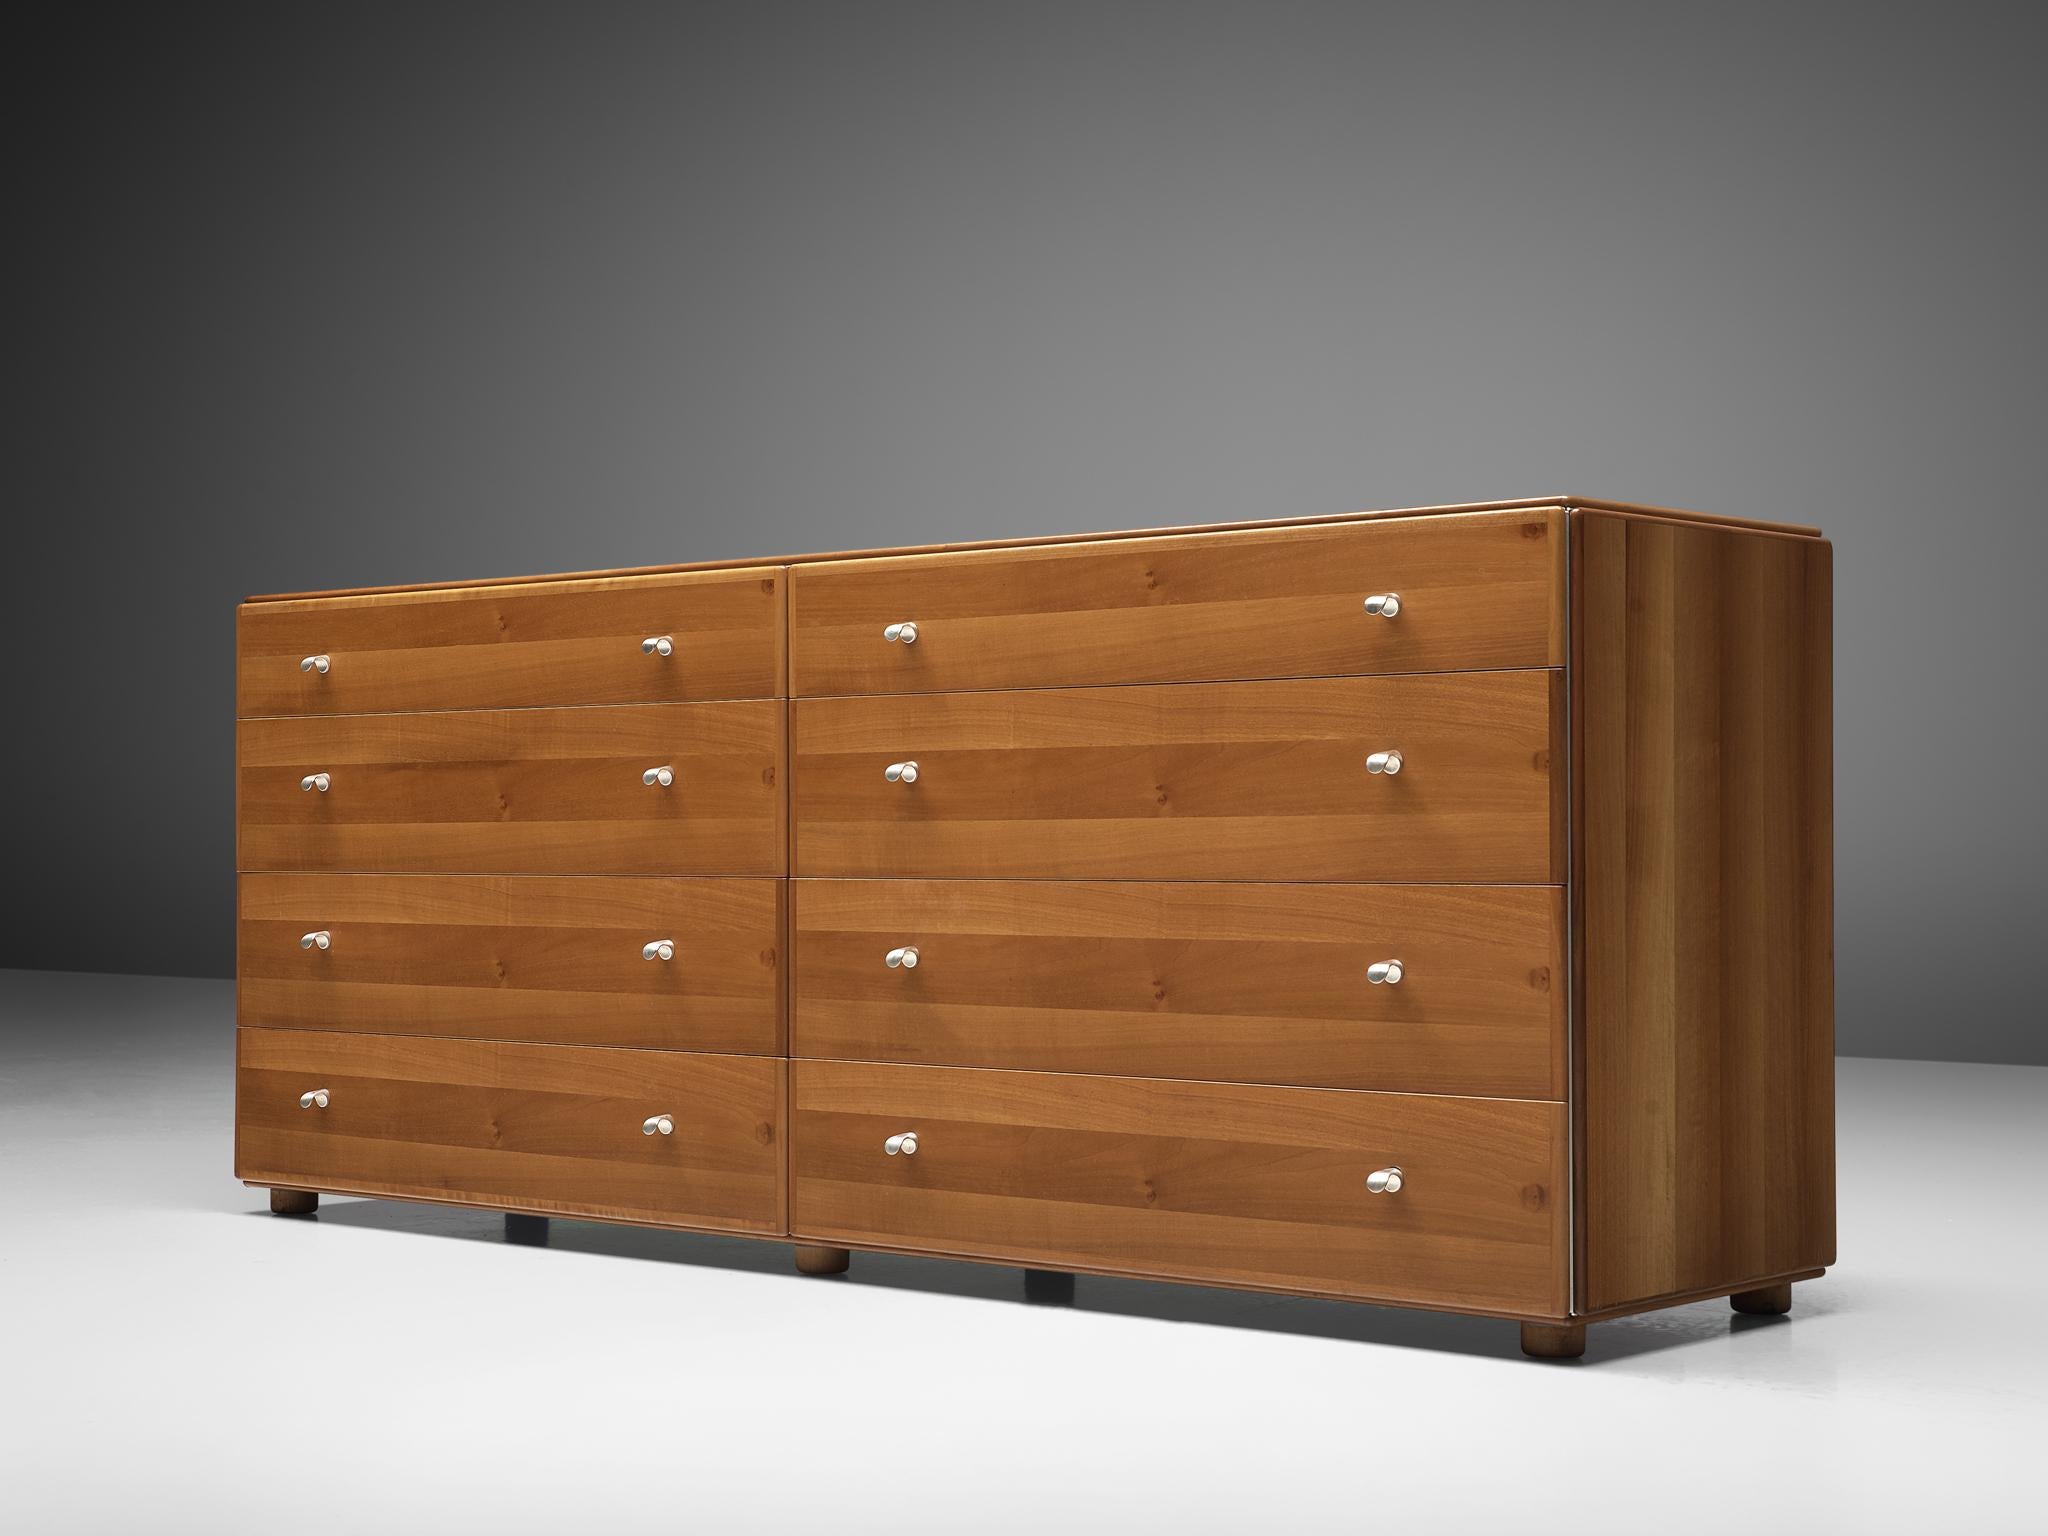 Tobia Scarpa, chests of drawers, walnut, Italy, 1960s 

These cabinets were designed by Tobia Scarpa, and shows a clear design that characterizes the work of Scarpa. The pieces show wonderful subtle details, such as the rounded door edges and